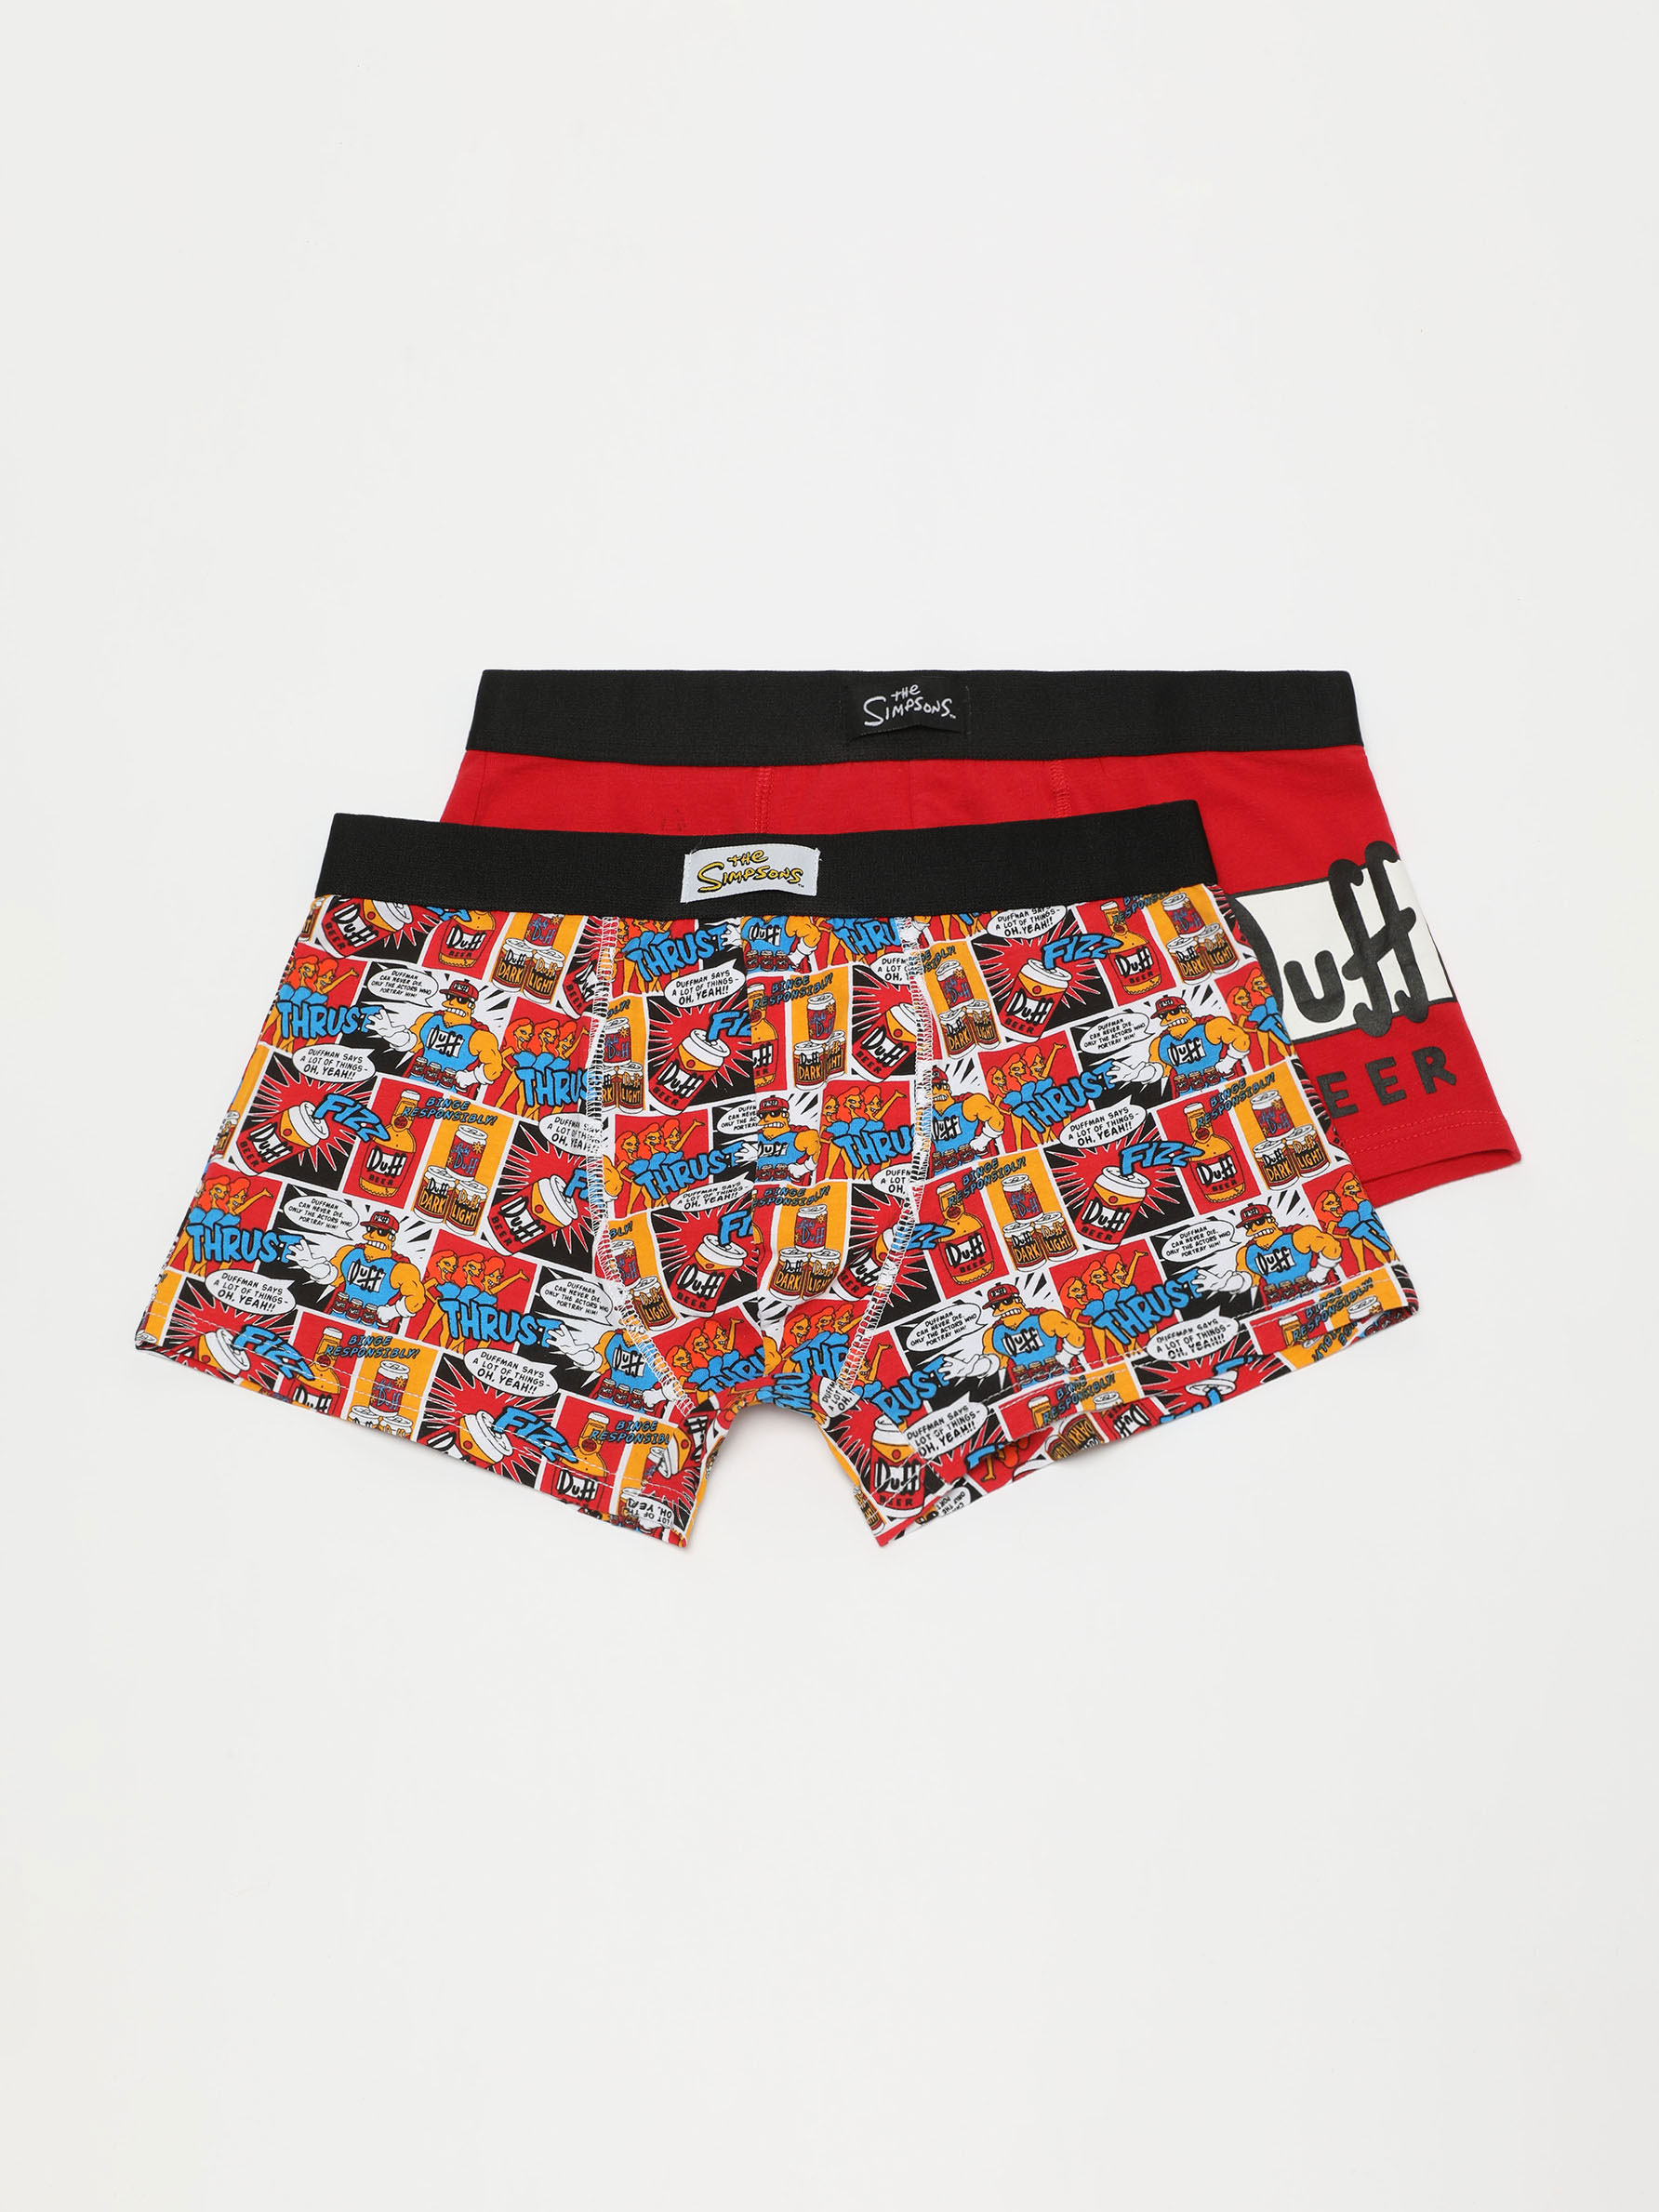 The Simpsons Mens Offizial Donut Boxer Shorts 2er Packung 